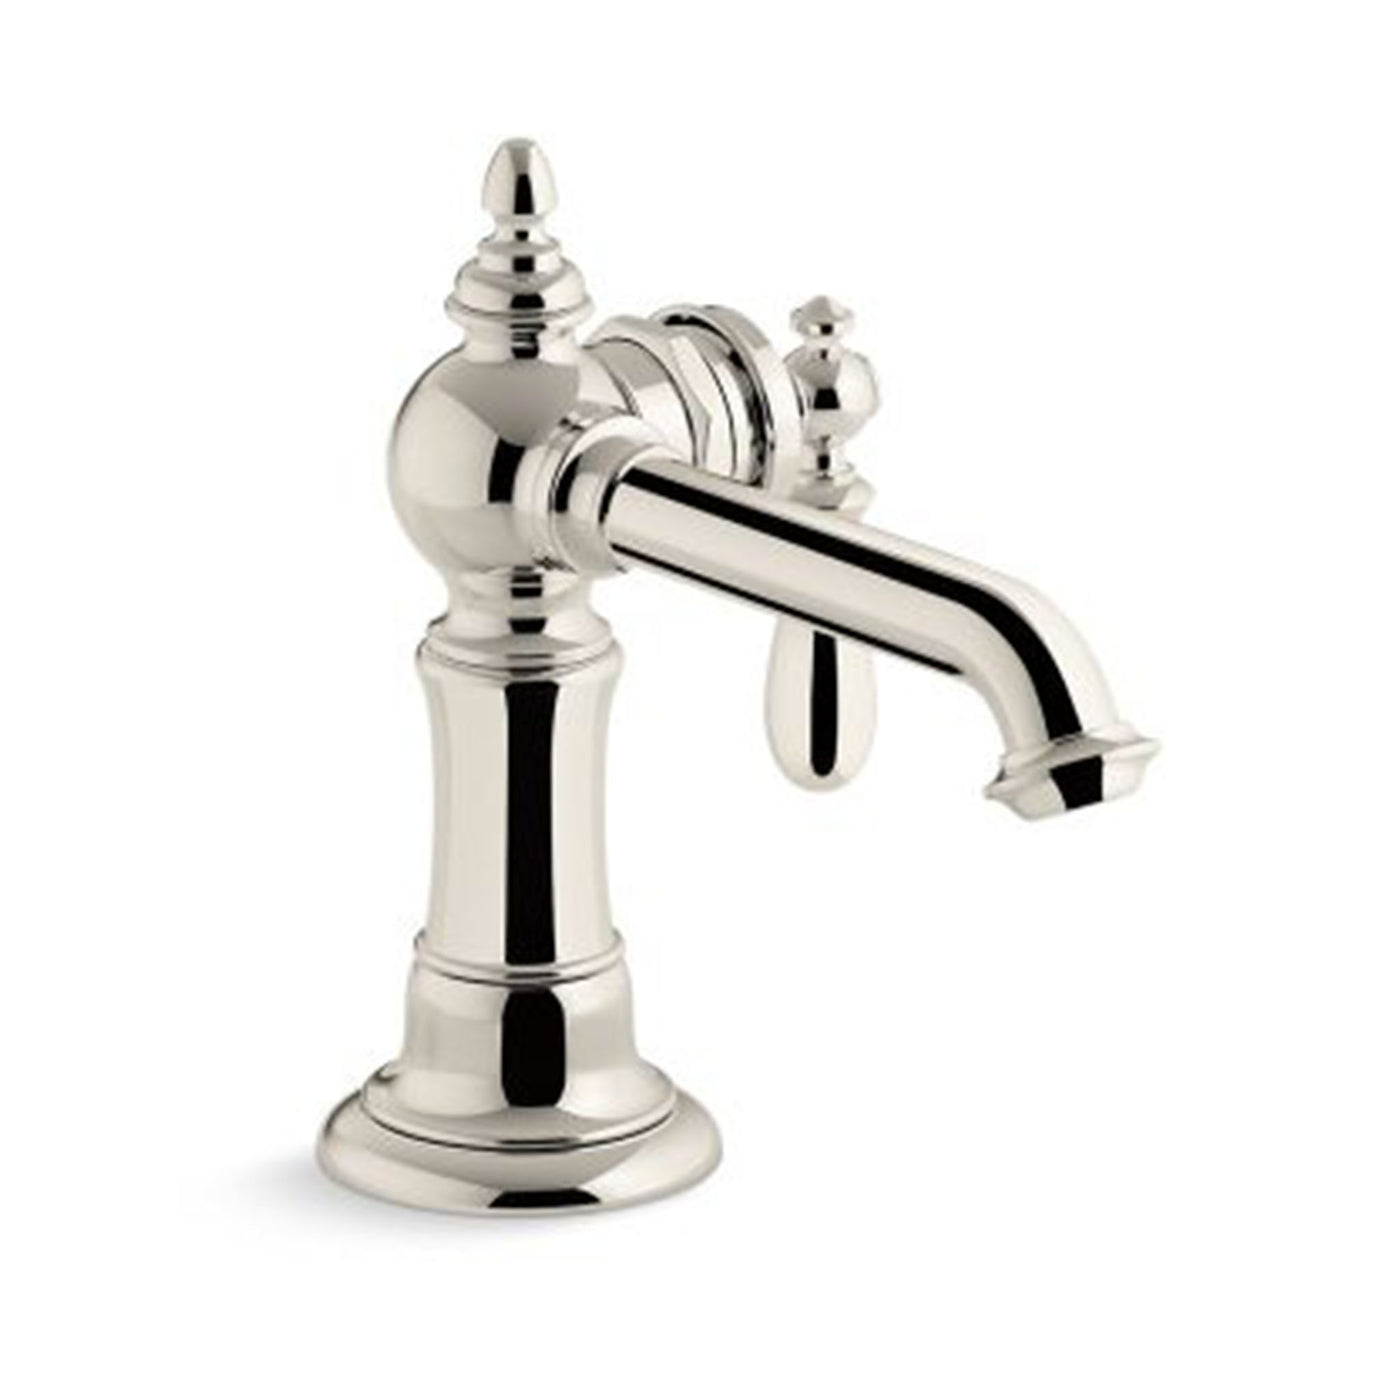 Artifacts® Single-handle bathroom sink faucet, 1.5 gpm